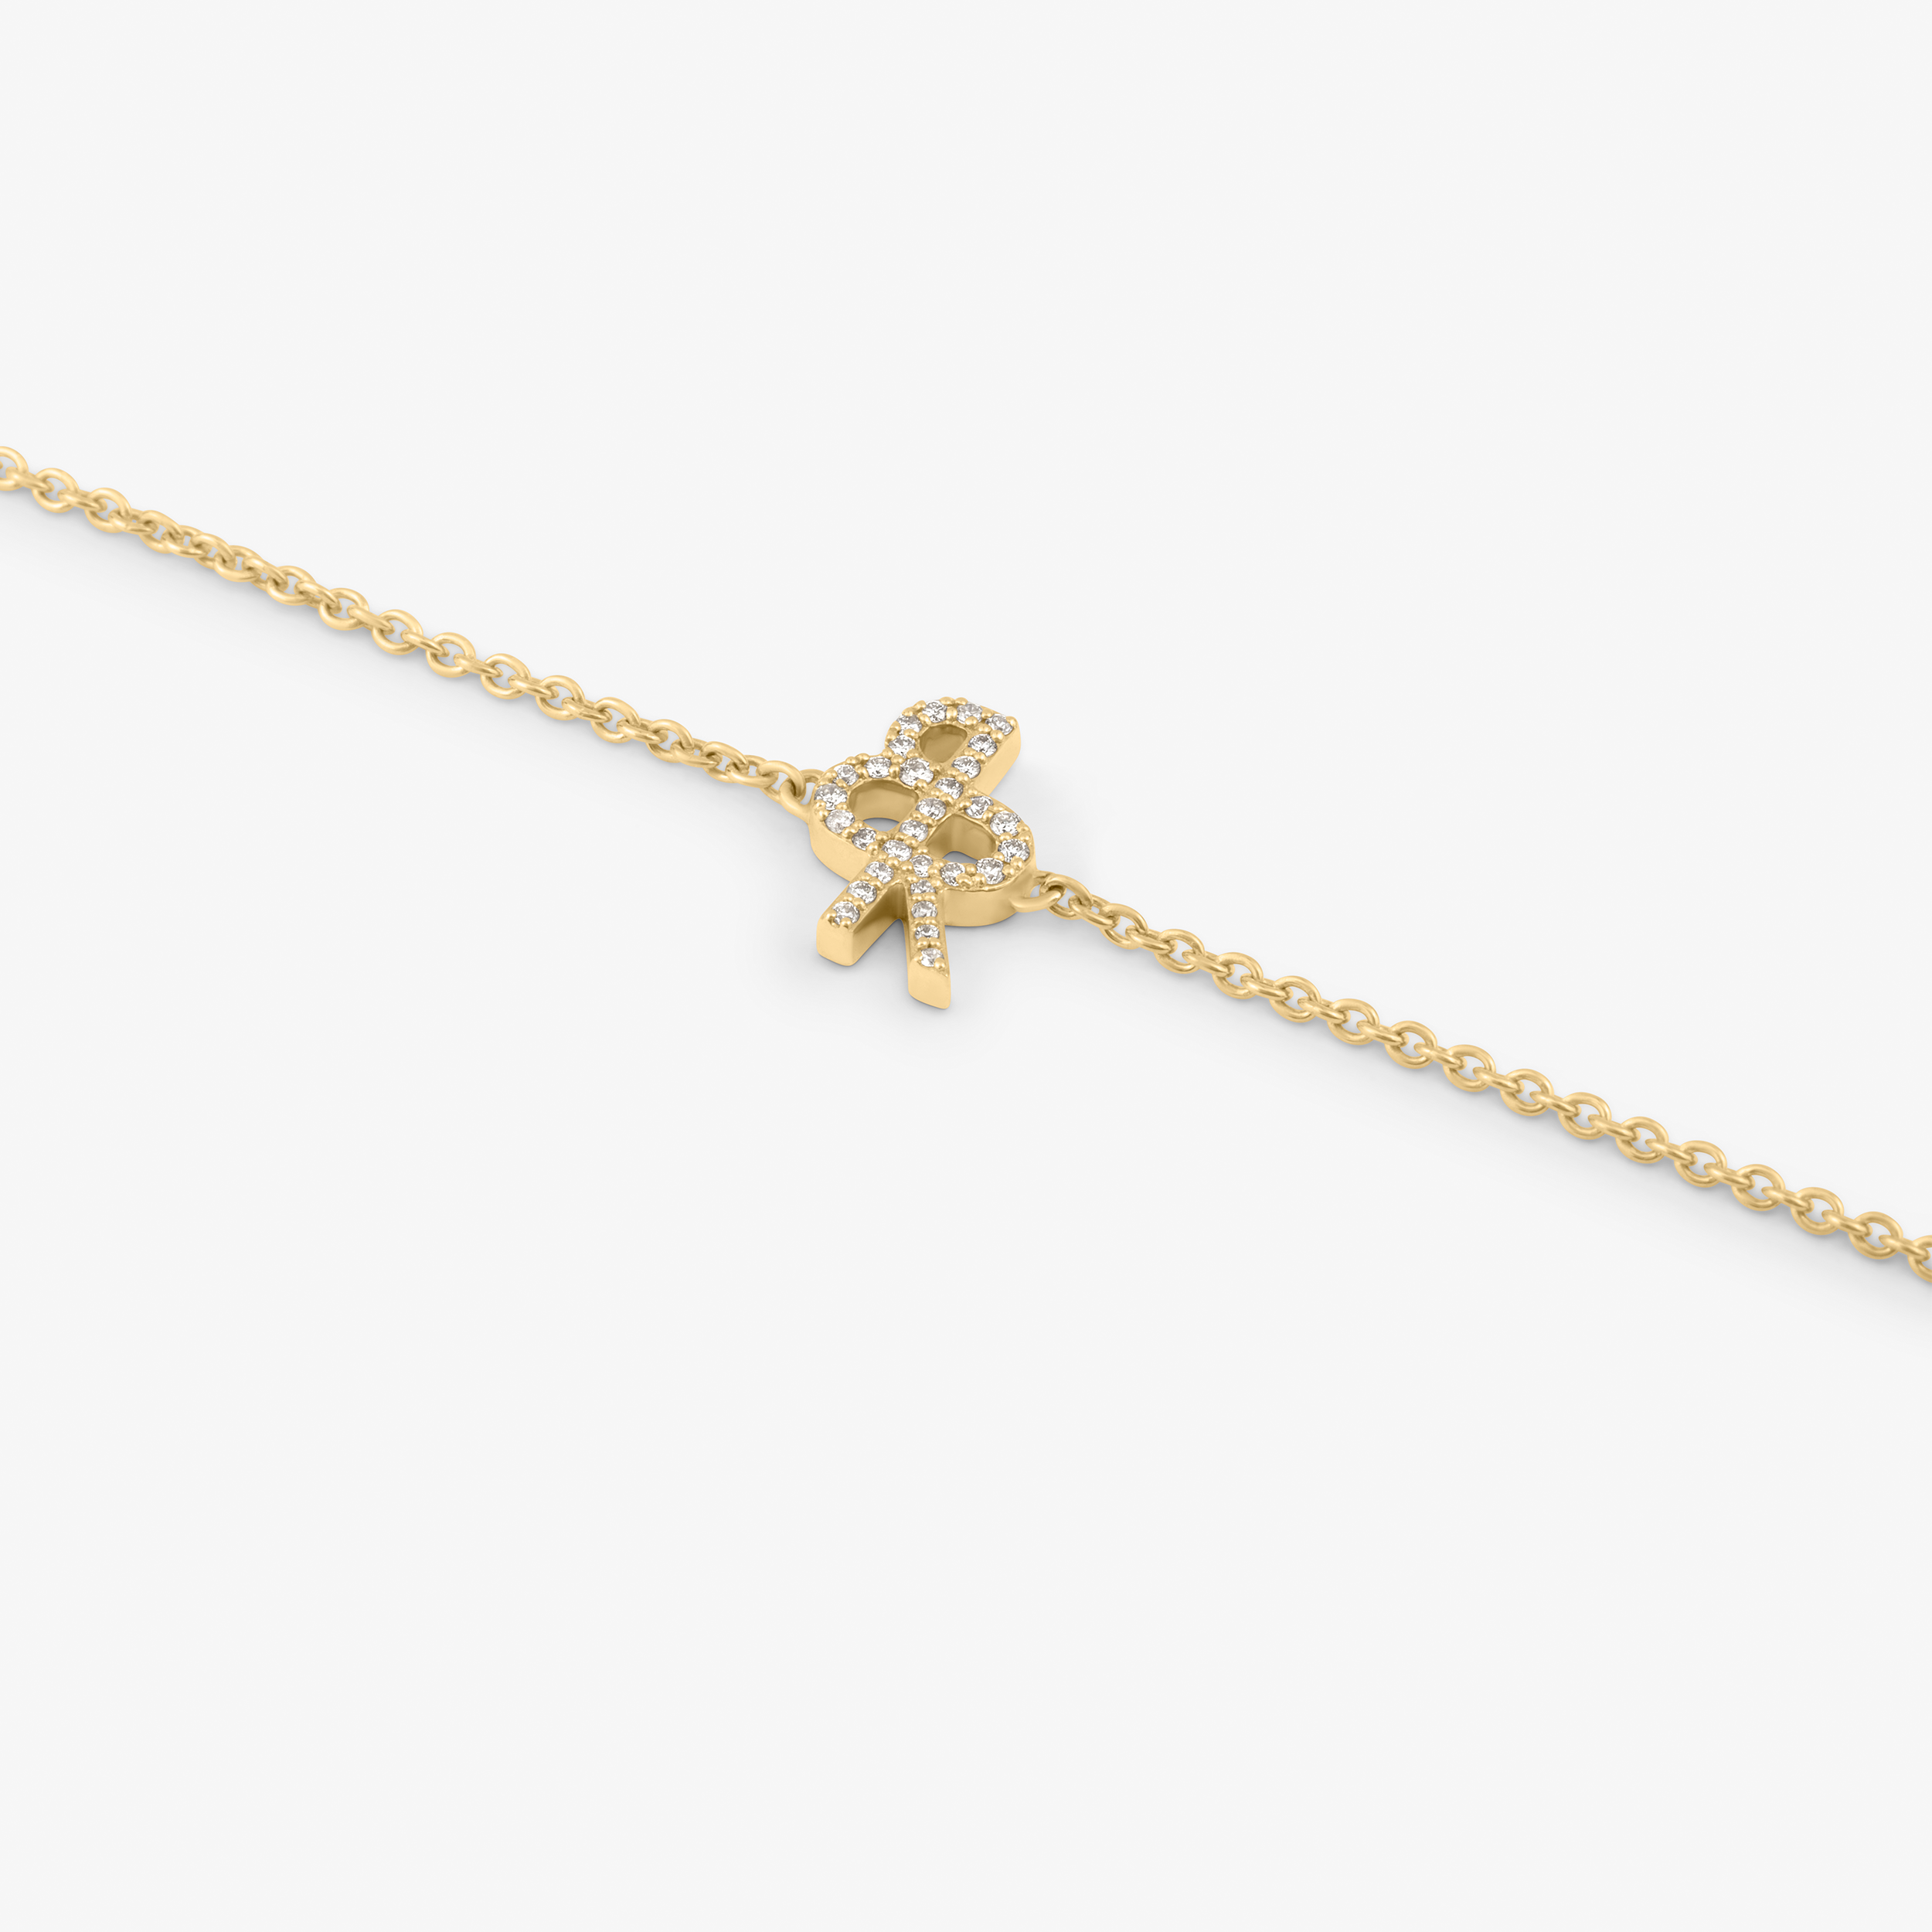 Logo Bracelet In 14K Solid Yellow Gold With Diamonds